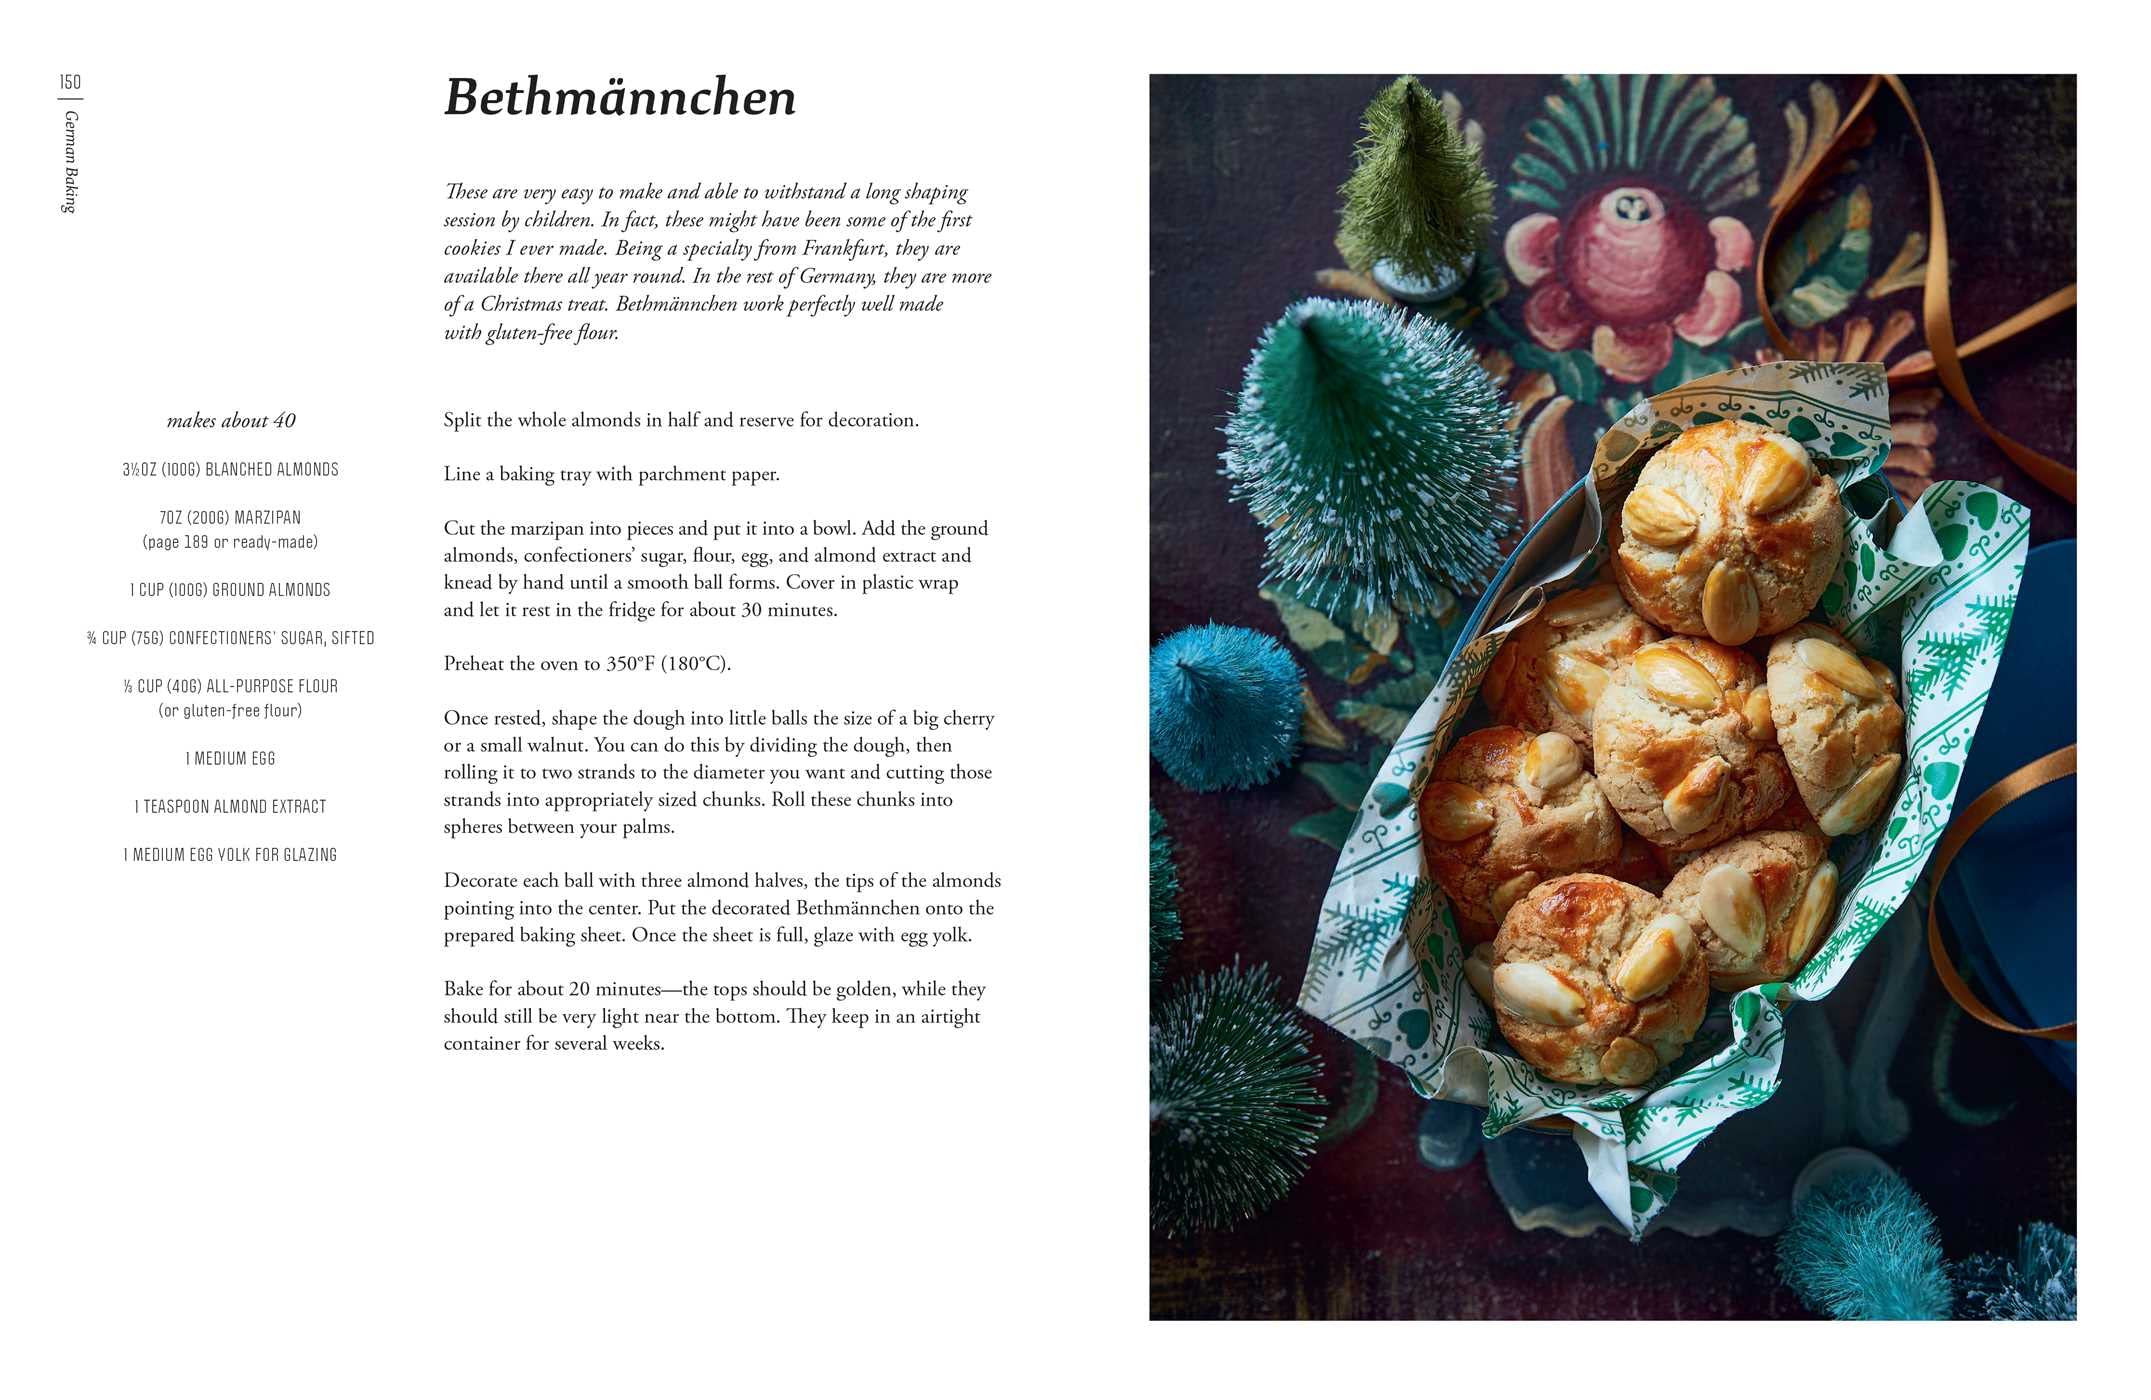 The German Baking Book: Cakes, Tarts, Breads, and More from the Black Forest and Beyond (Jurgen Krauss)